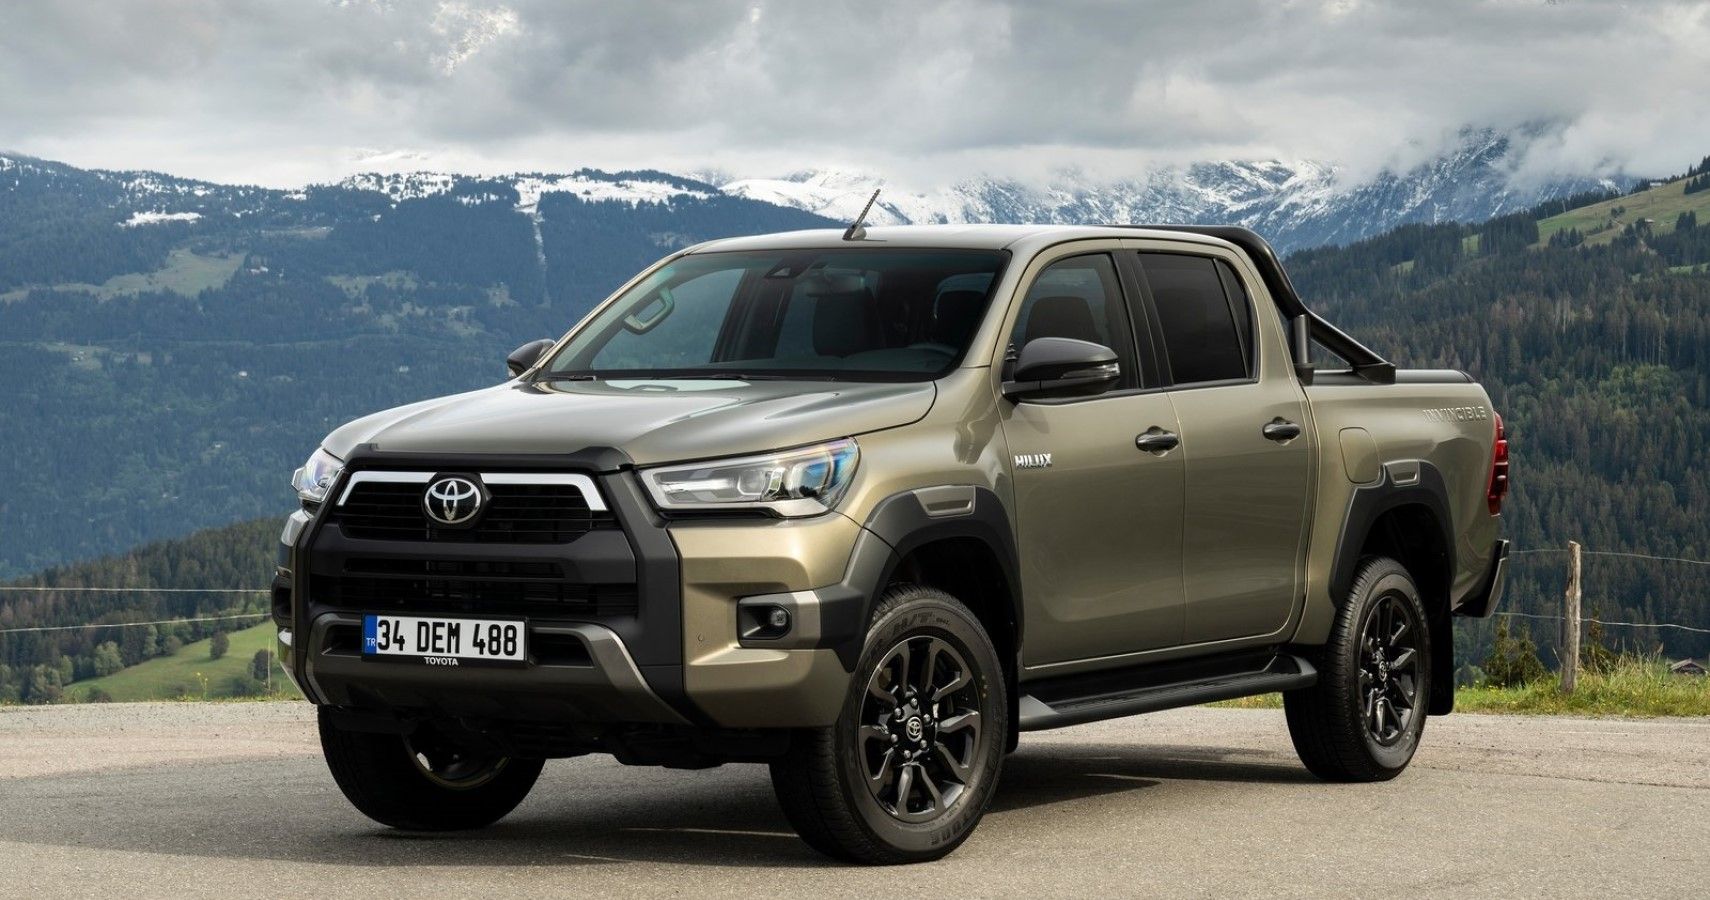 Noordoosten Voorman Vesting The Real Reason Why Toyota Hilux Is Banned In The US